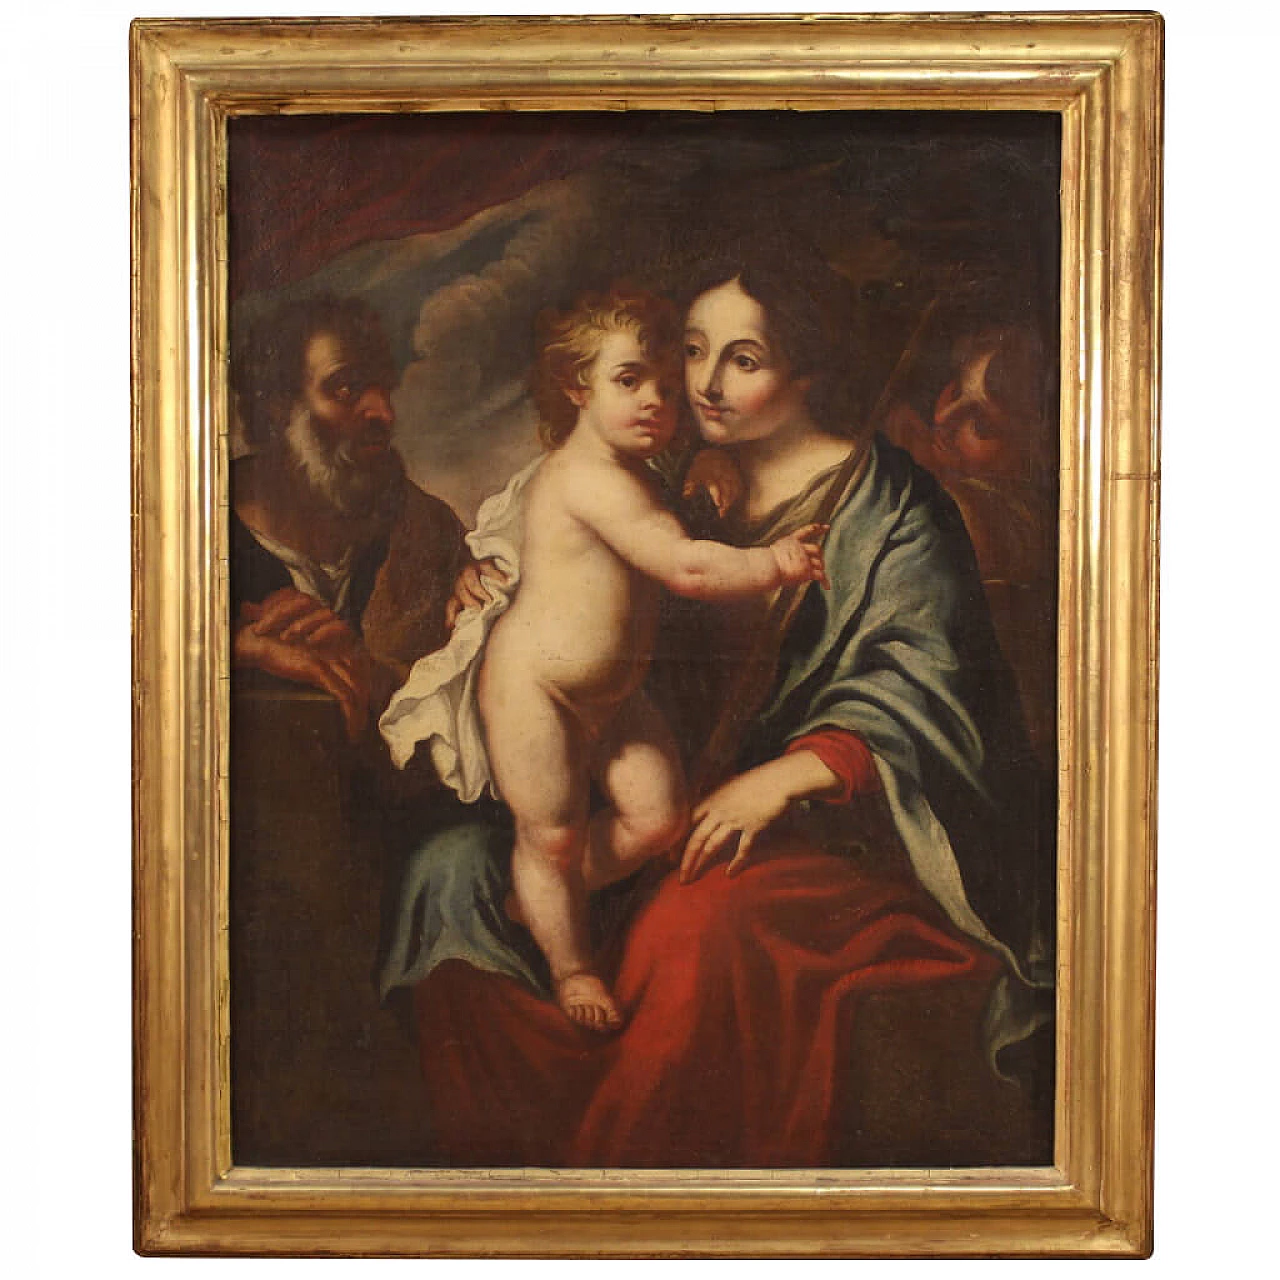 Antique painting with Holy Family, 17th century 1306889